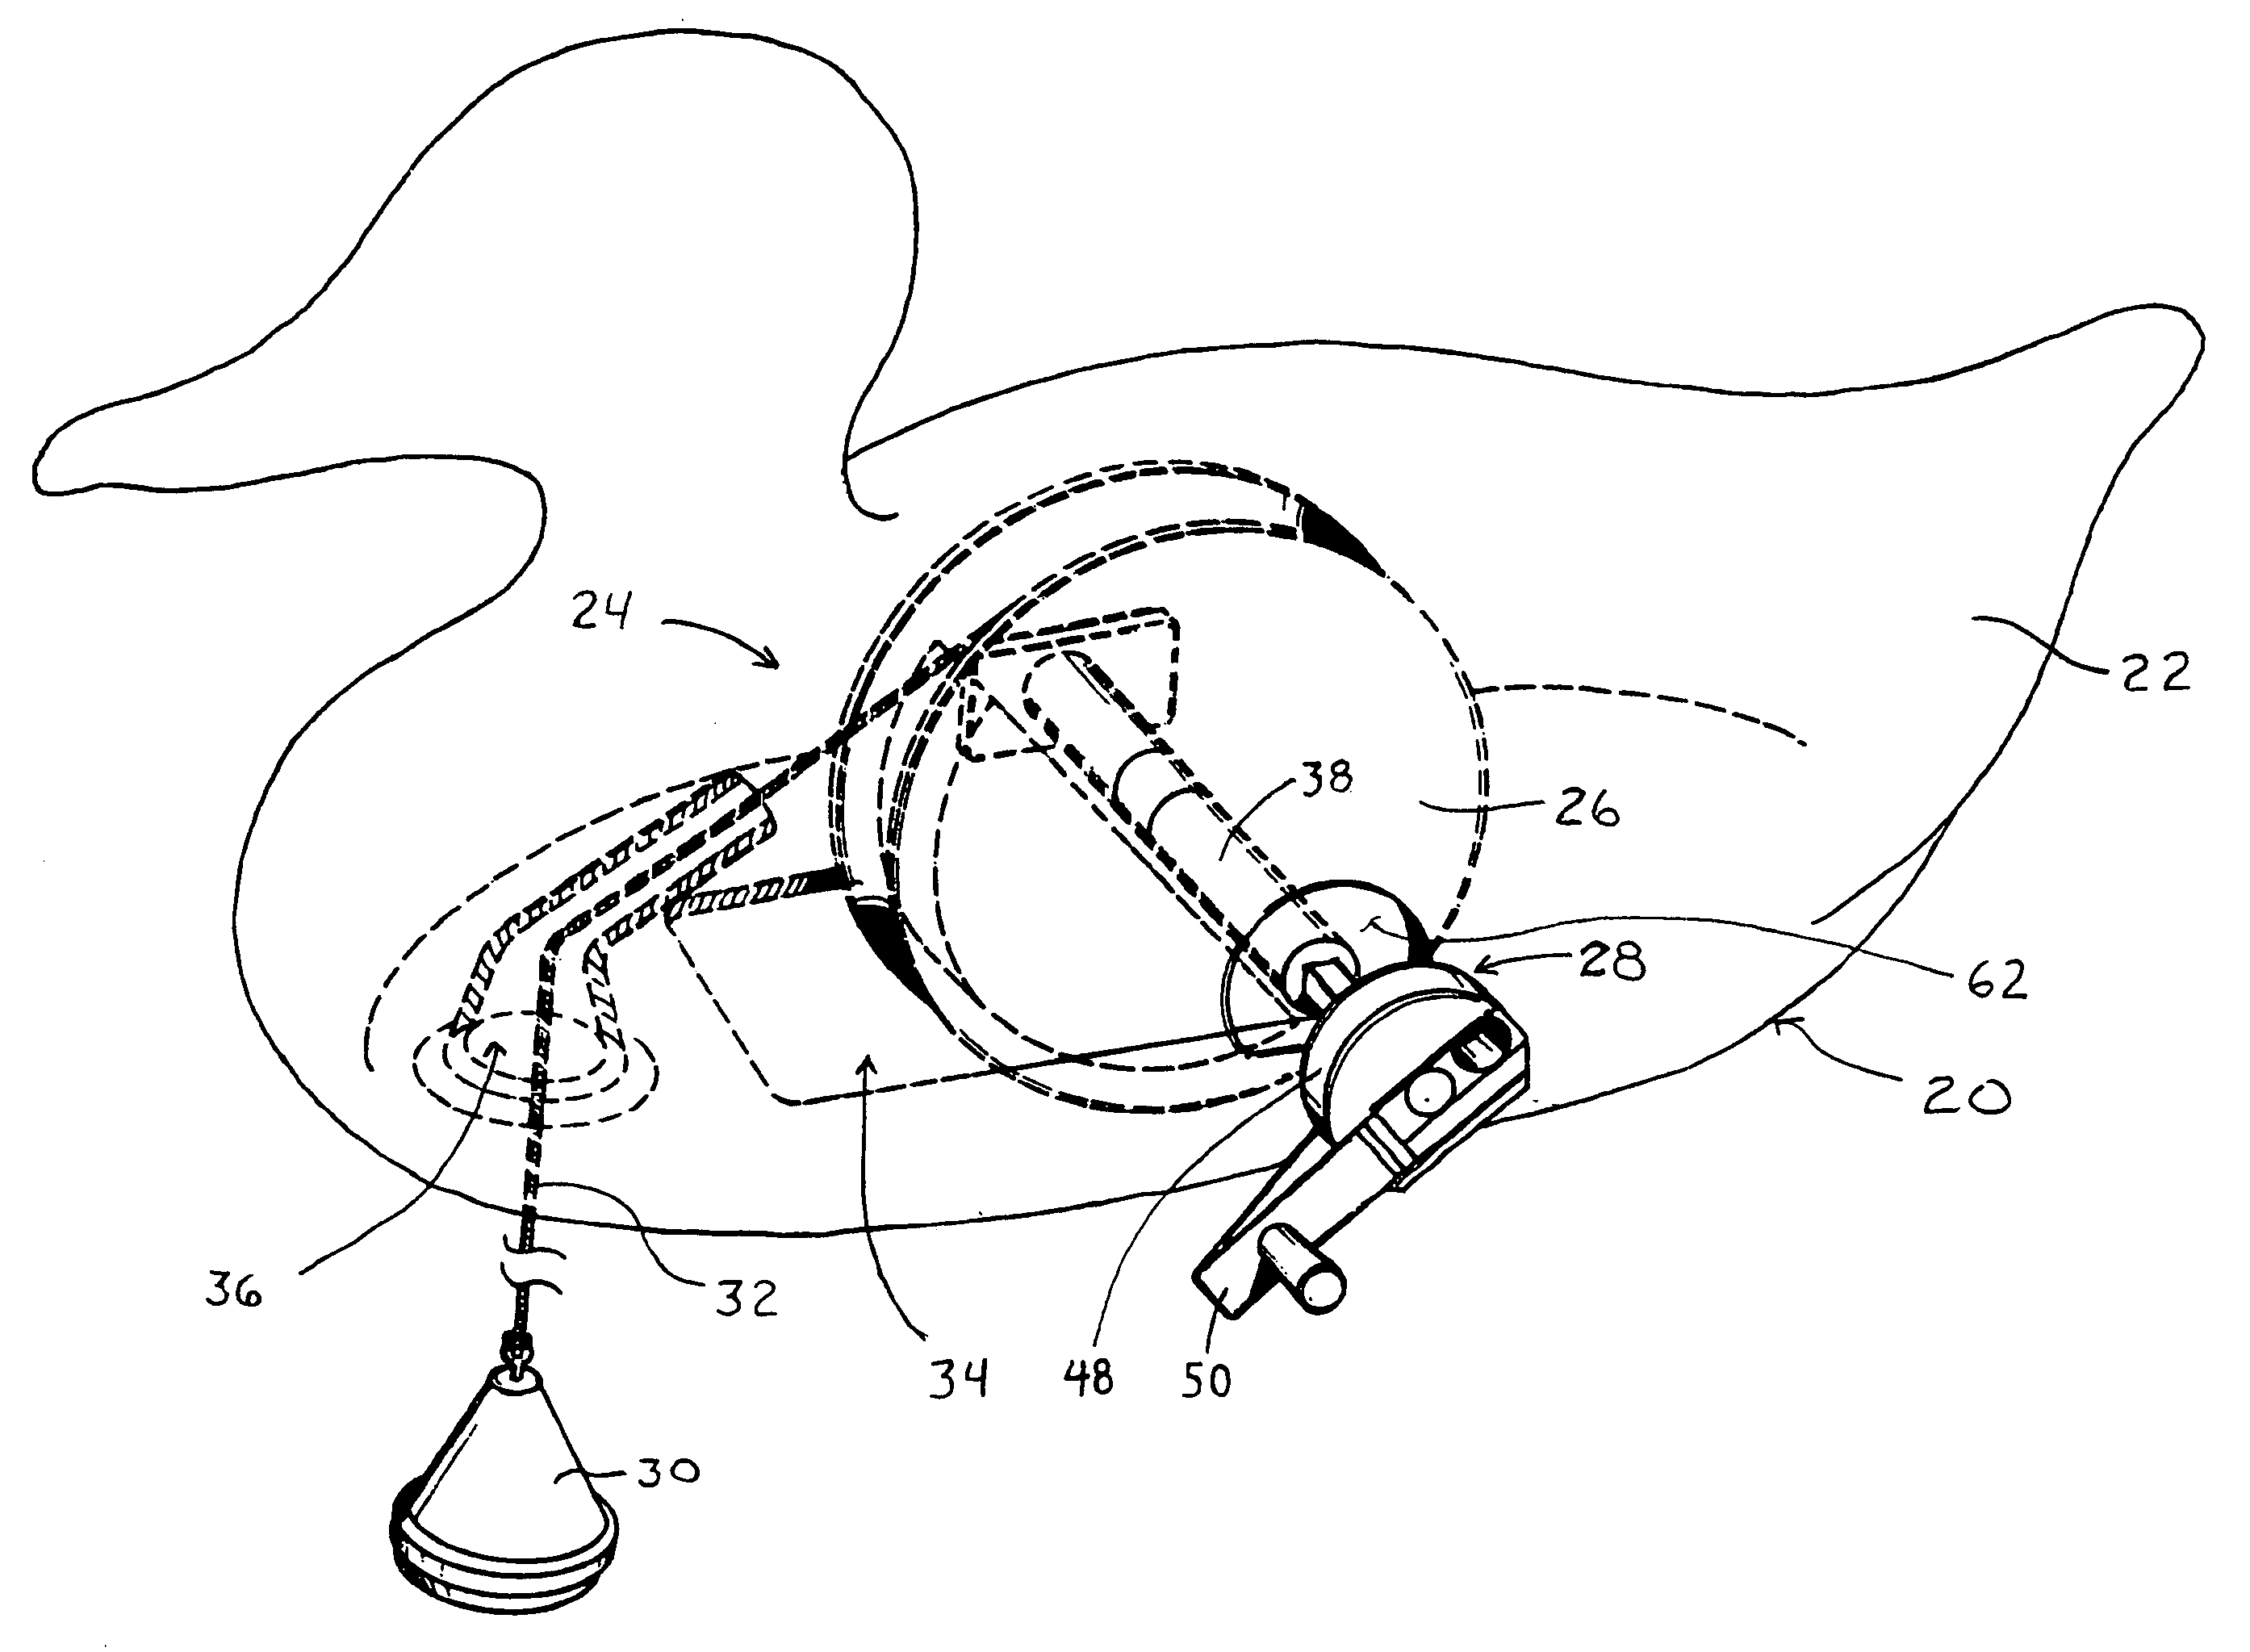 Self-righting waterfowl decoy with integrated anchor and locking mechanism